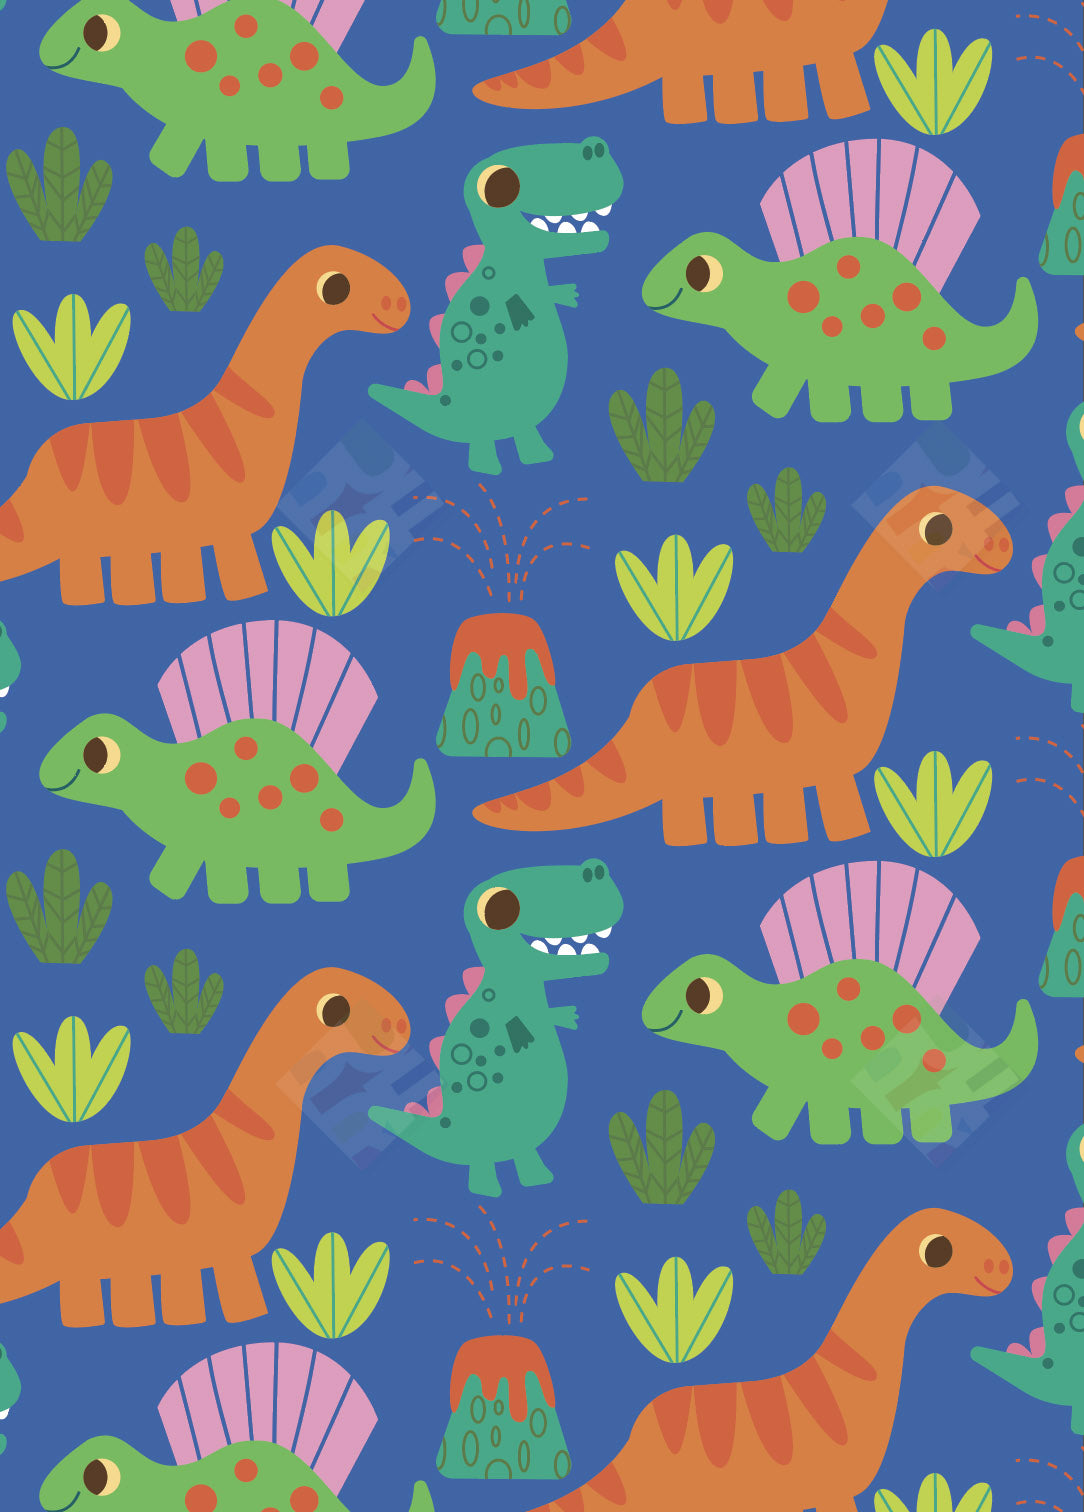 Pure Art Licensing Agency Dianosaur Pattern by Fhiona Galloway